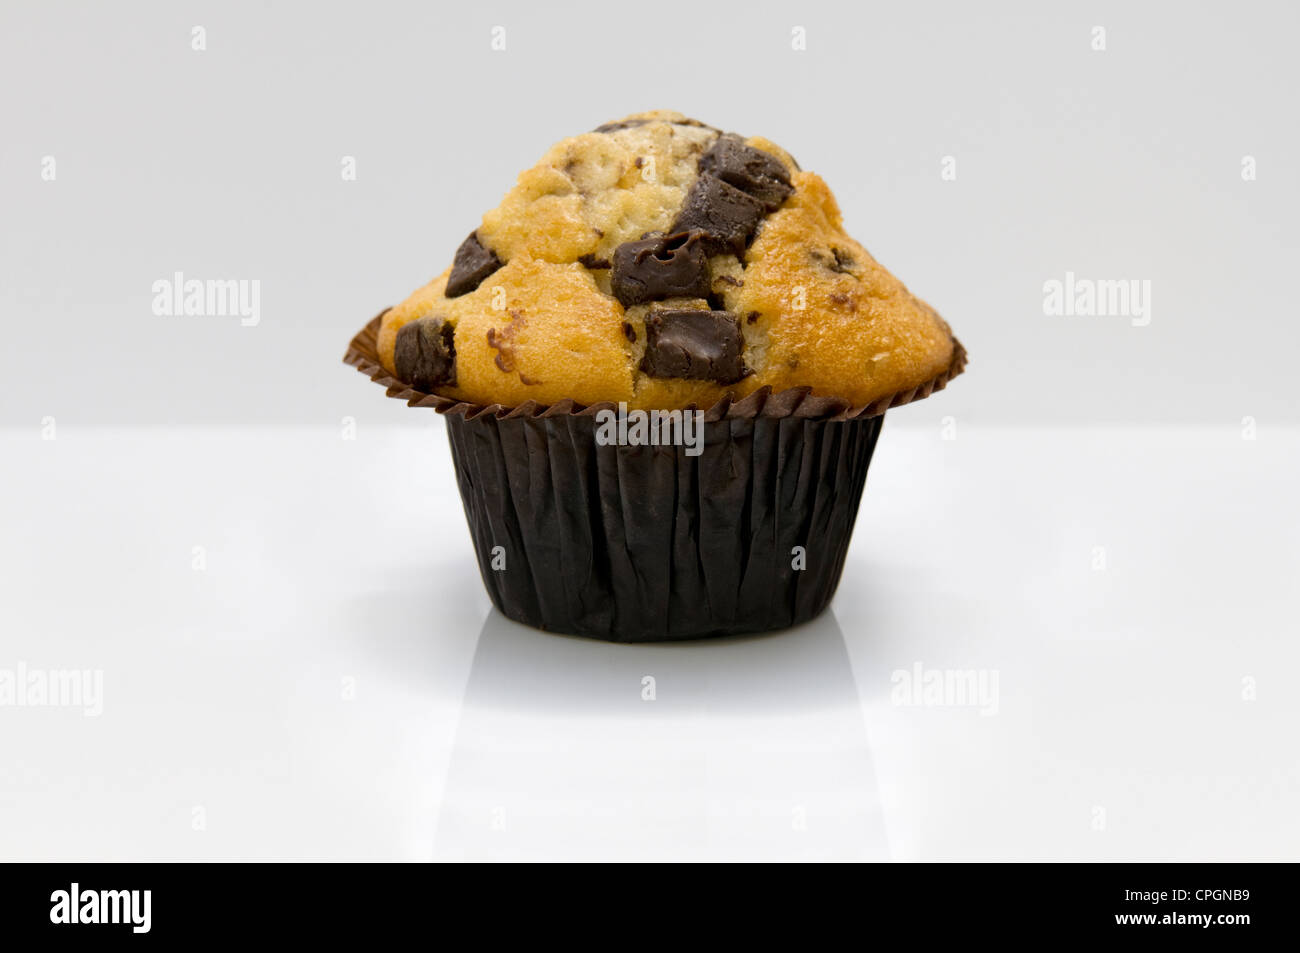 Chocolate chip muffin on white background Stock Photo